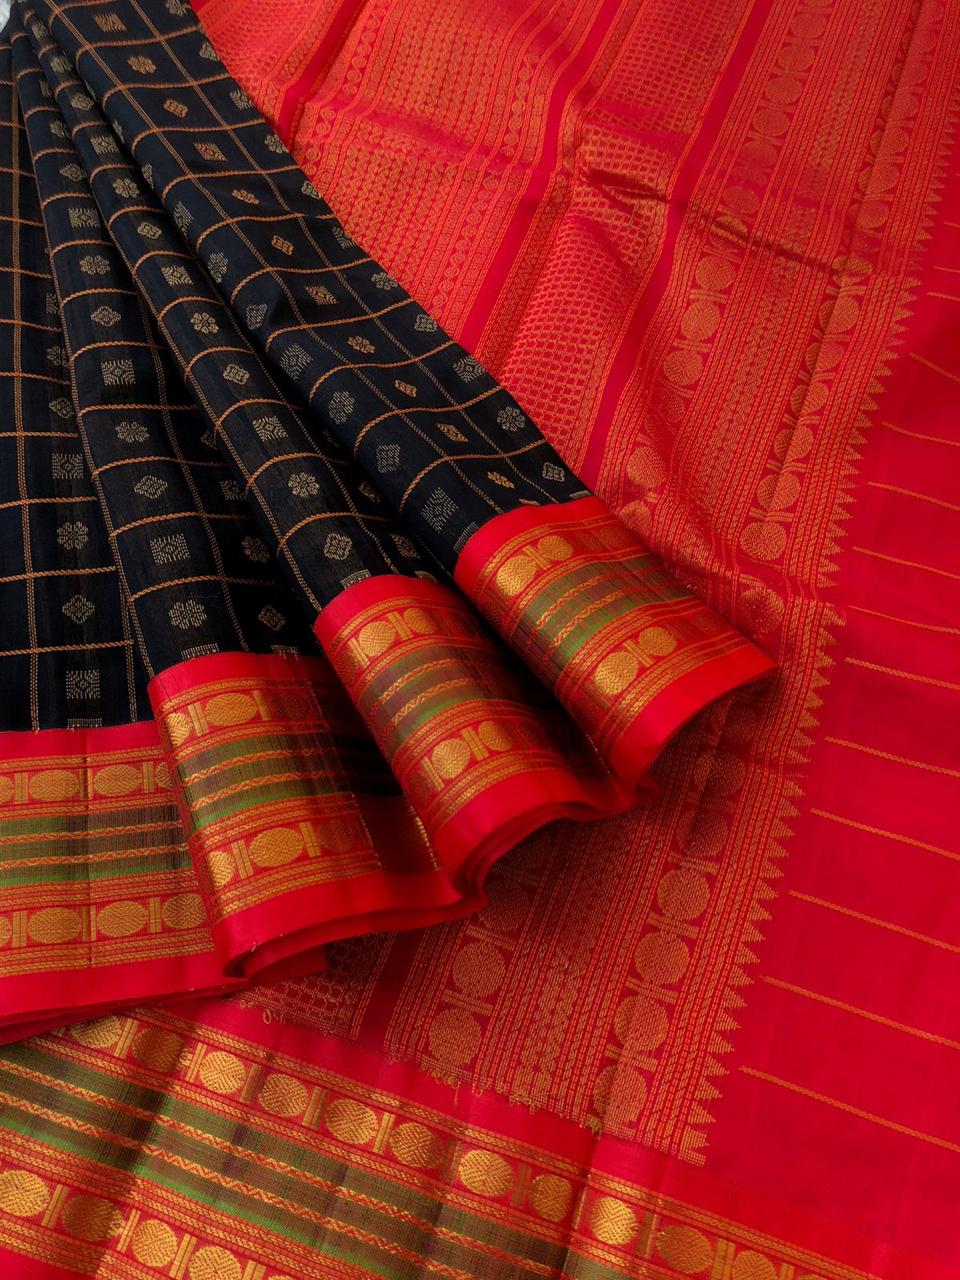 Divyam - Korvai Silk Cotton with Pure Silk Woven Borders -stunning black and red 1000 buttas